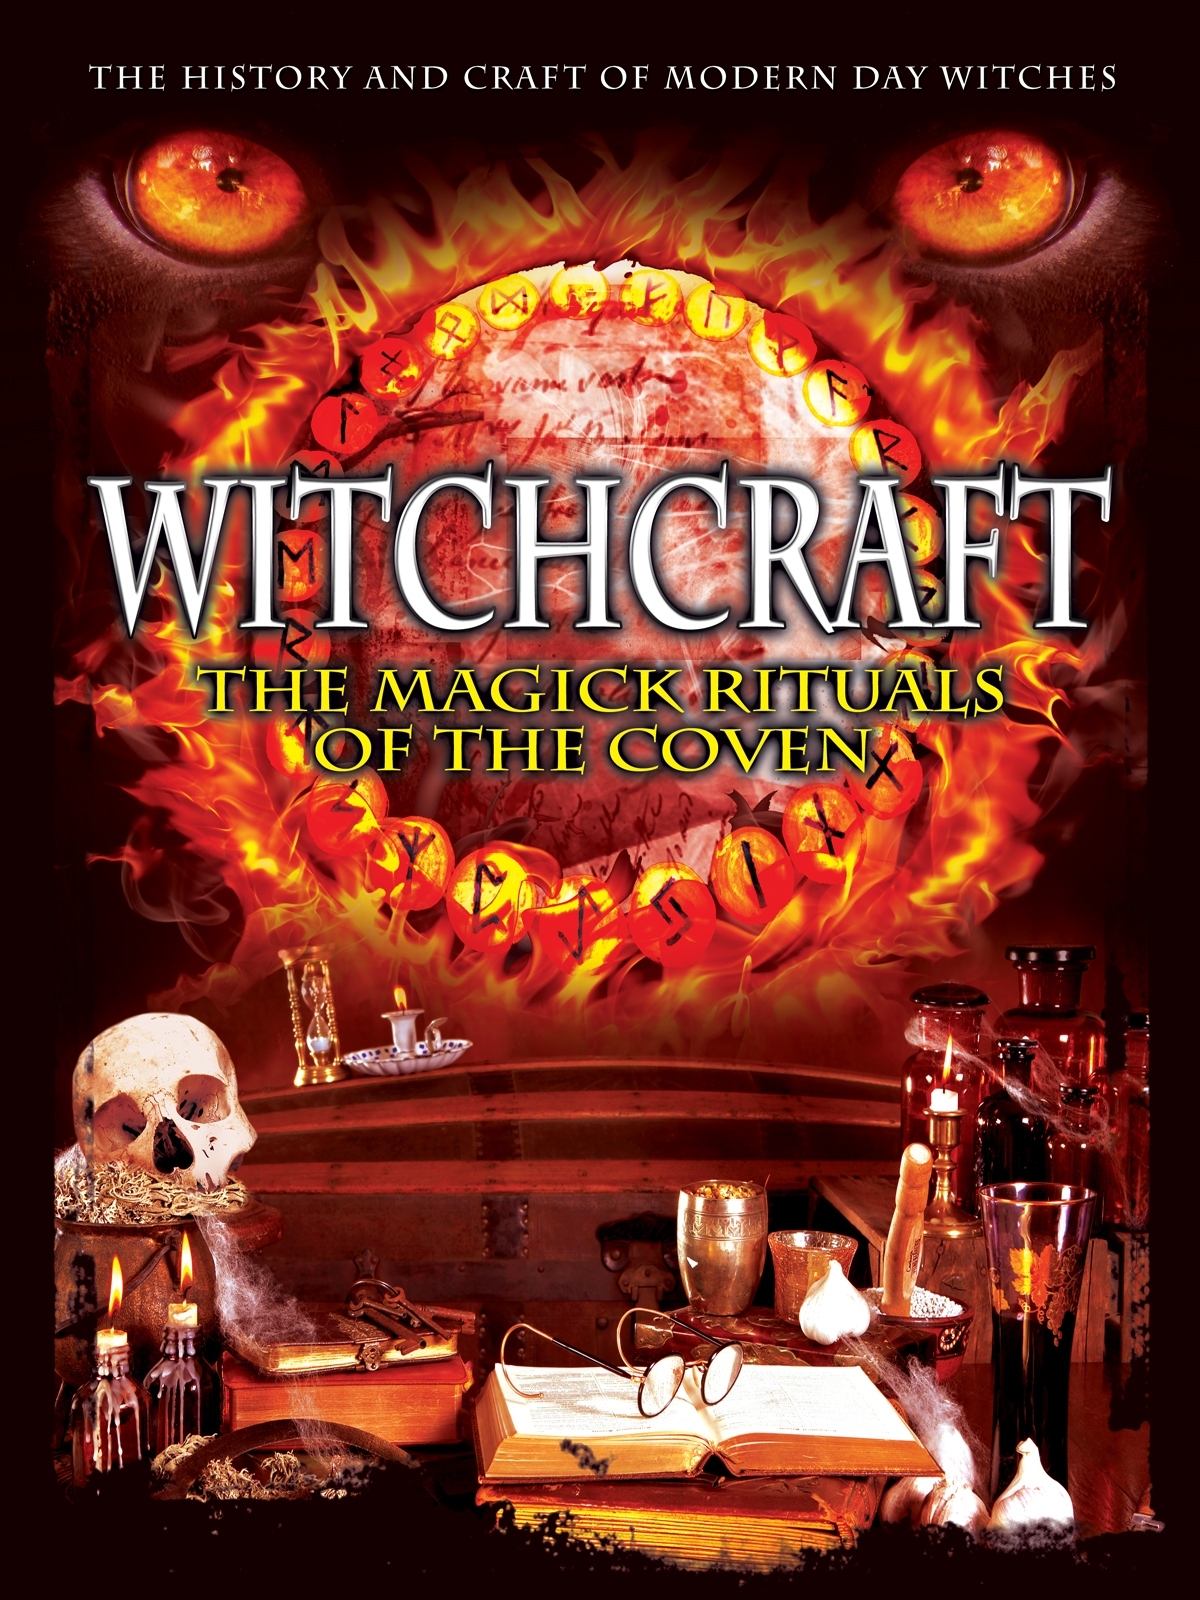 Witchcraft: The Magick Rituals of the Coven